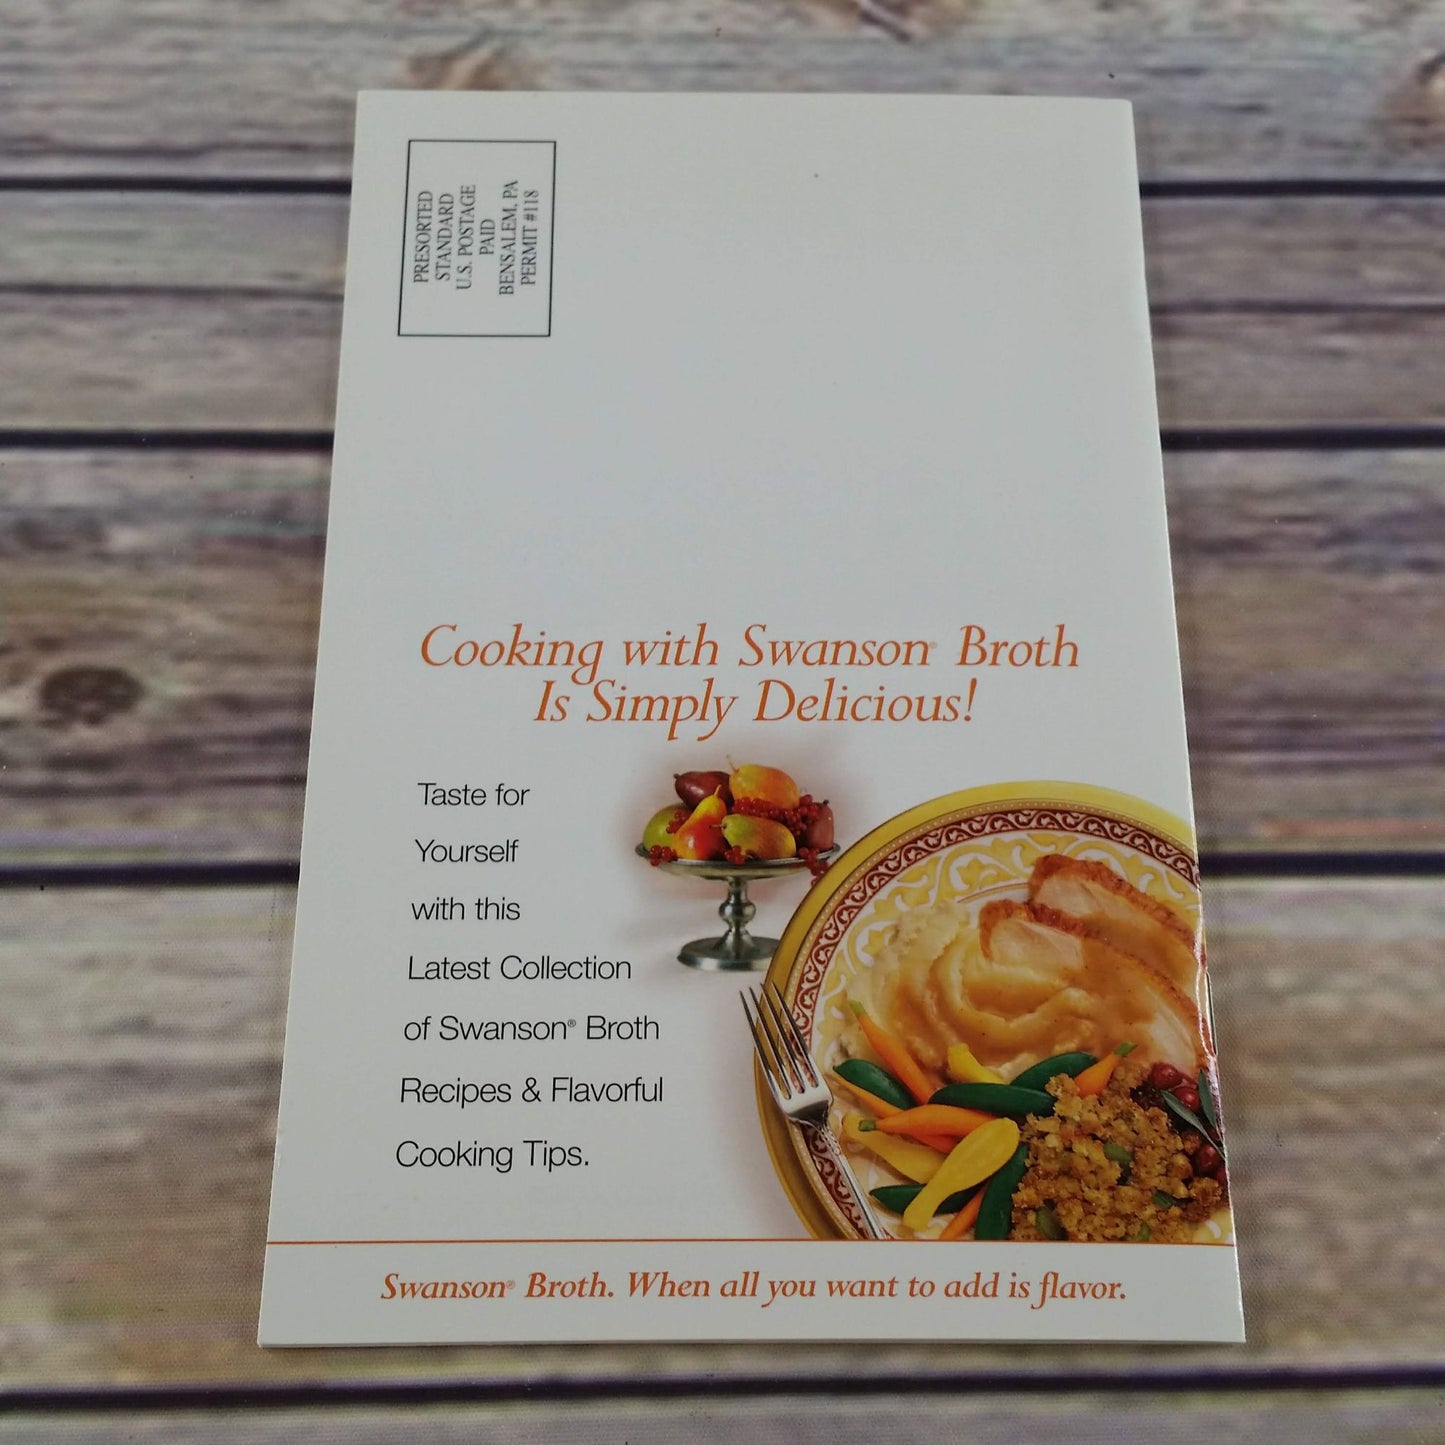 Swanson Broth Simply Delicious Cooking Pamphlet Grocery Store Booklet 2000